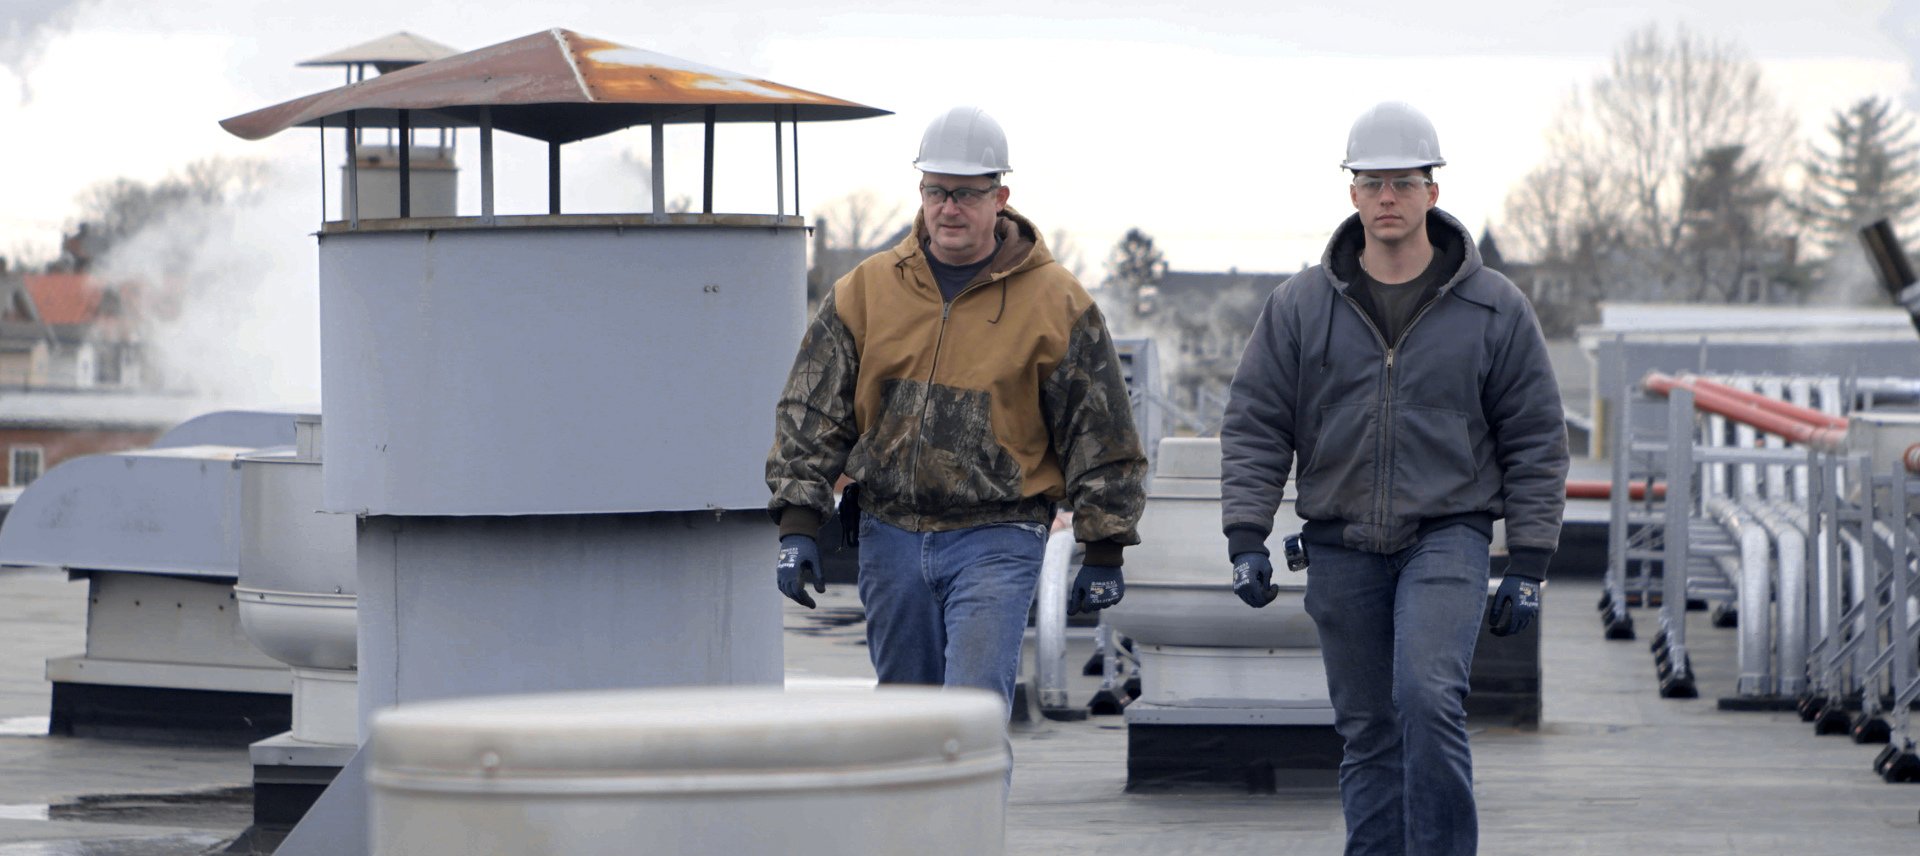 Two protected workers walking on rooftop